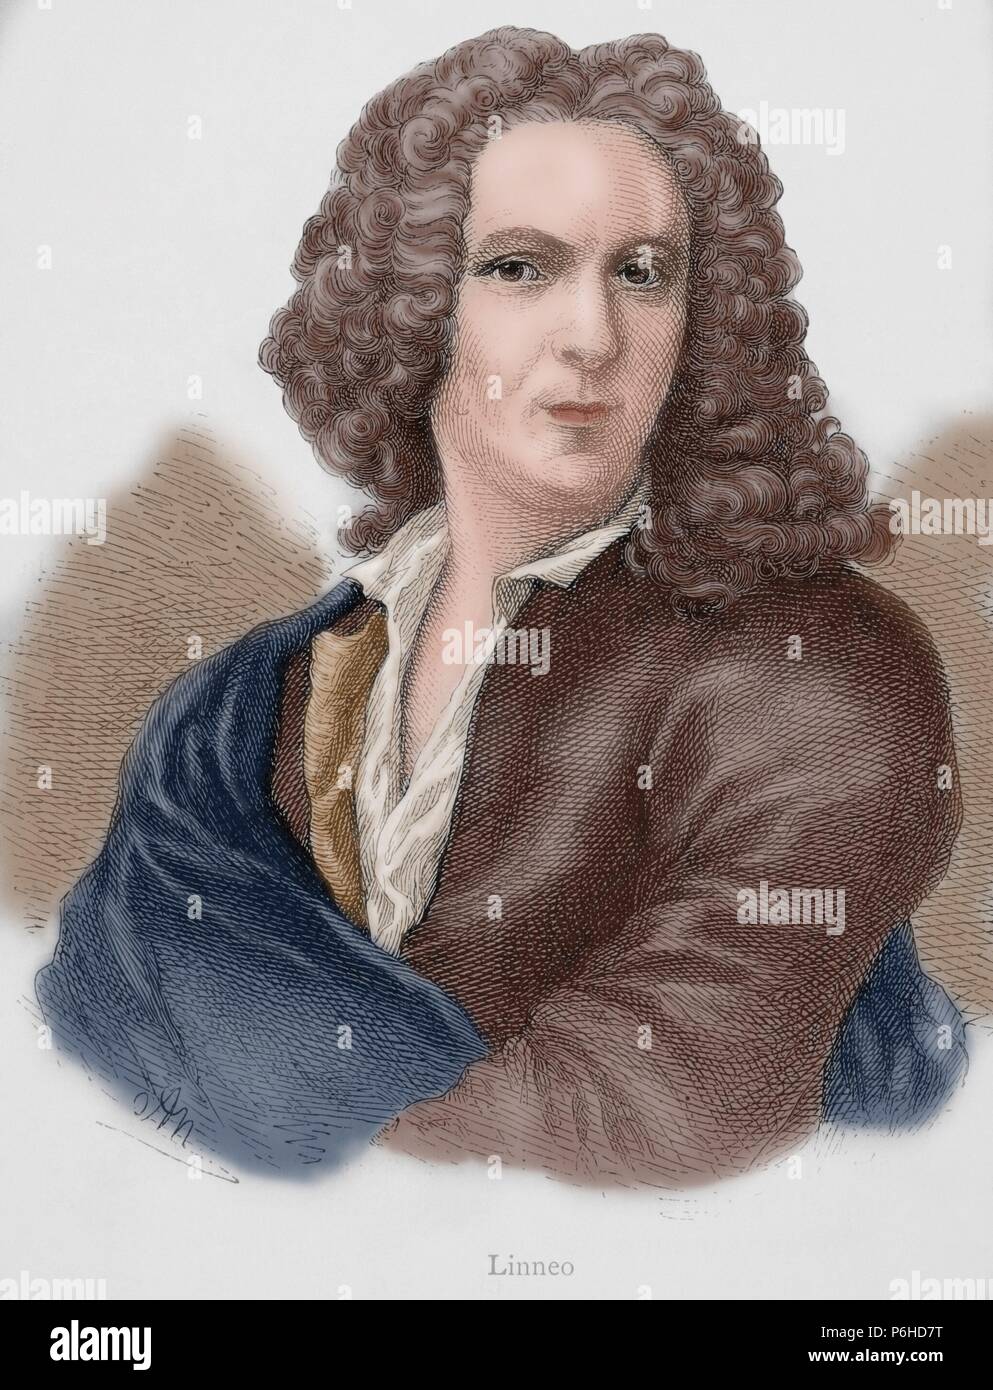 Carl Linnaeus (1707-1778). Swedish physician and botanist. Engraving by G. Neumann in Our Century, 1883. Colored. Stock Photo